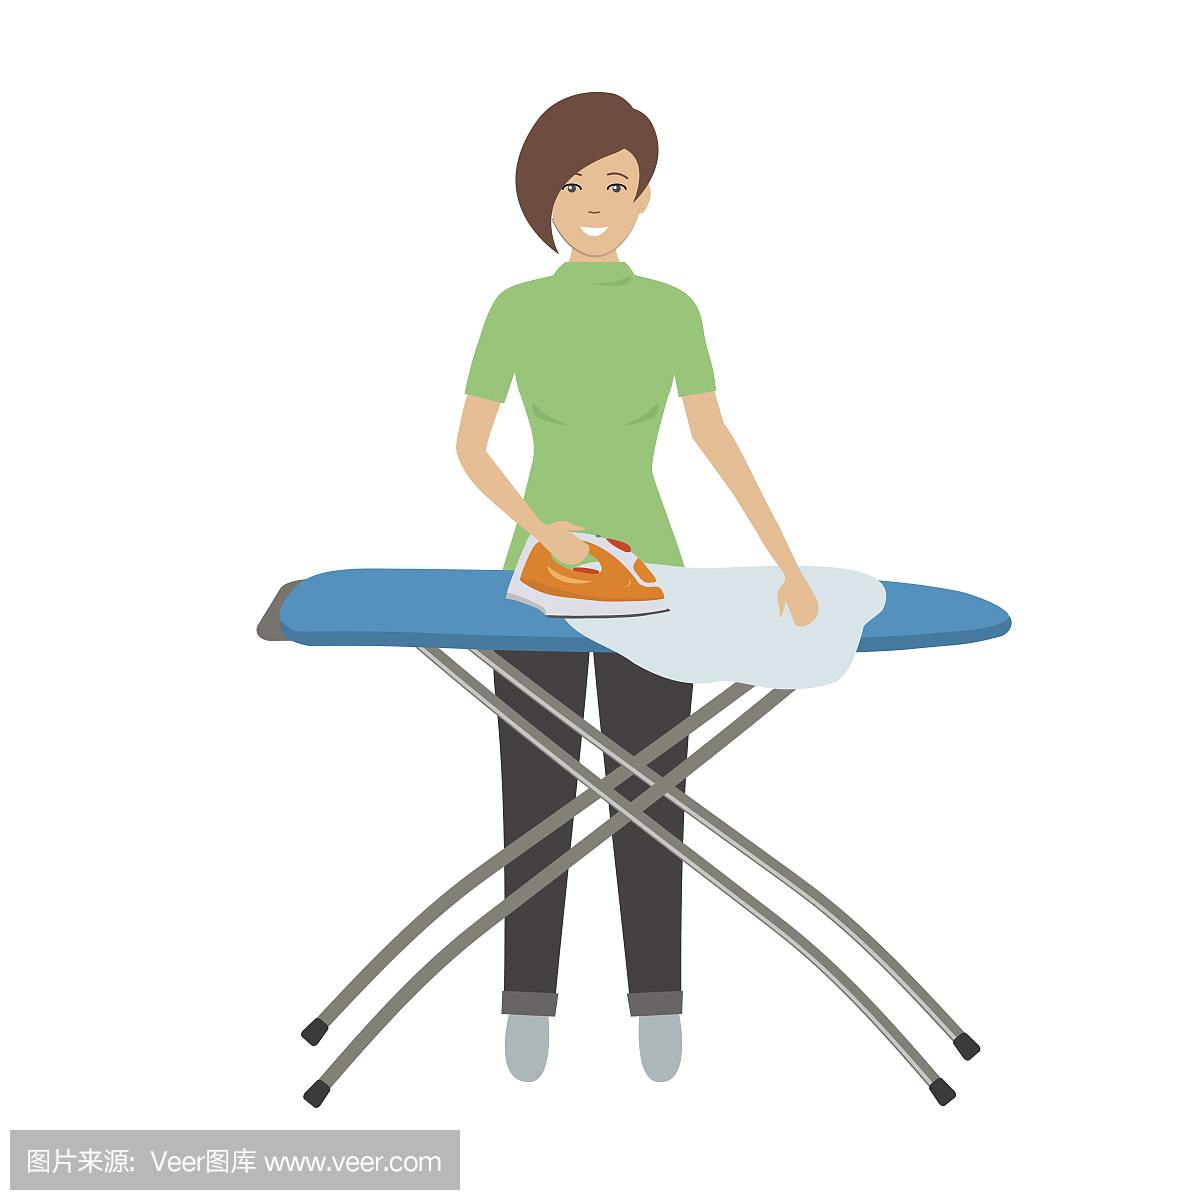 Young woman ironing clothes on ironing board